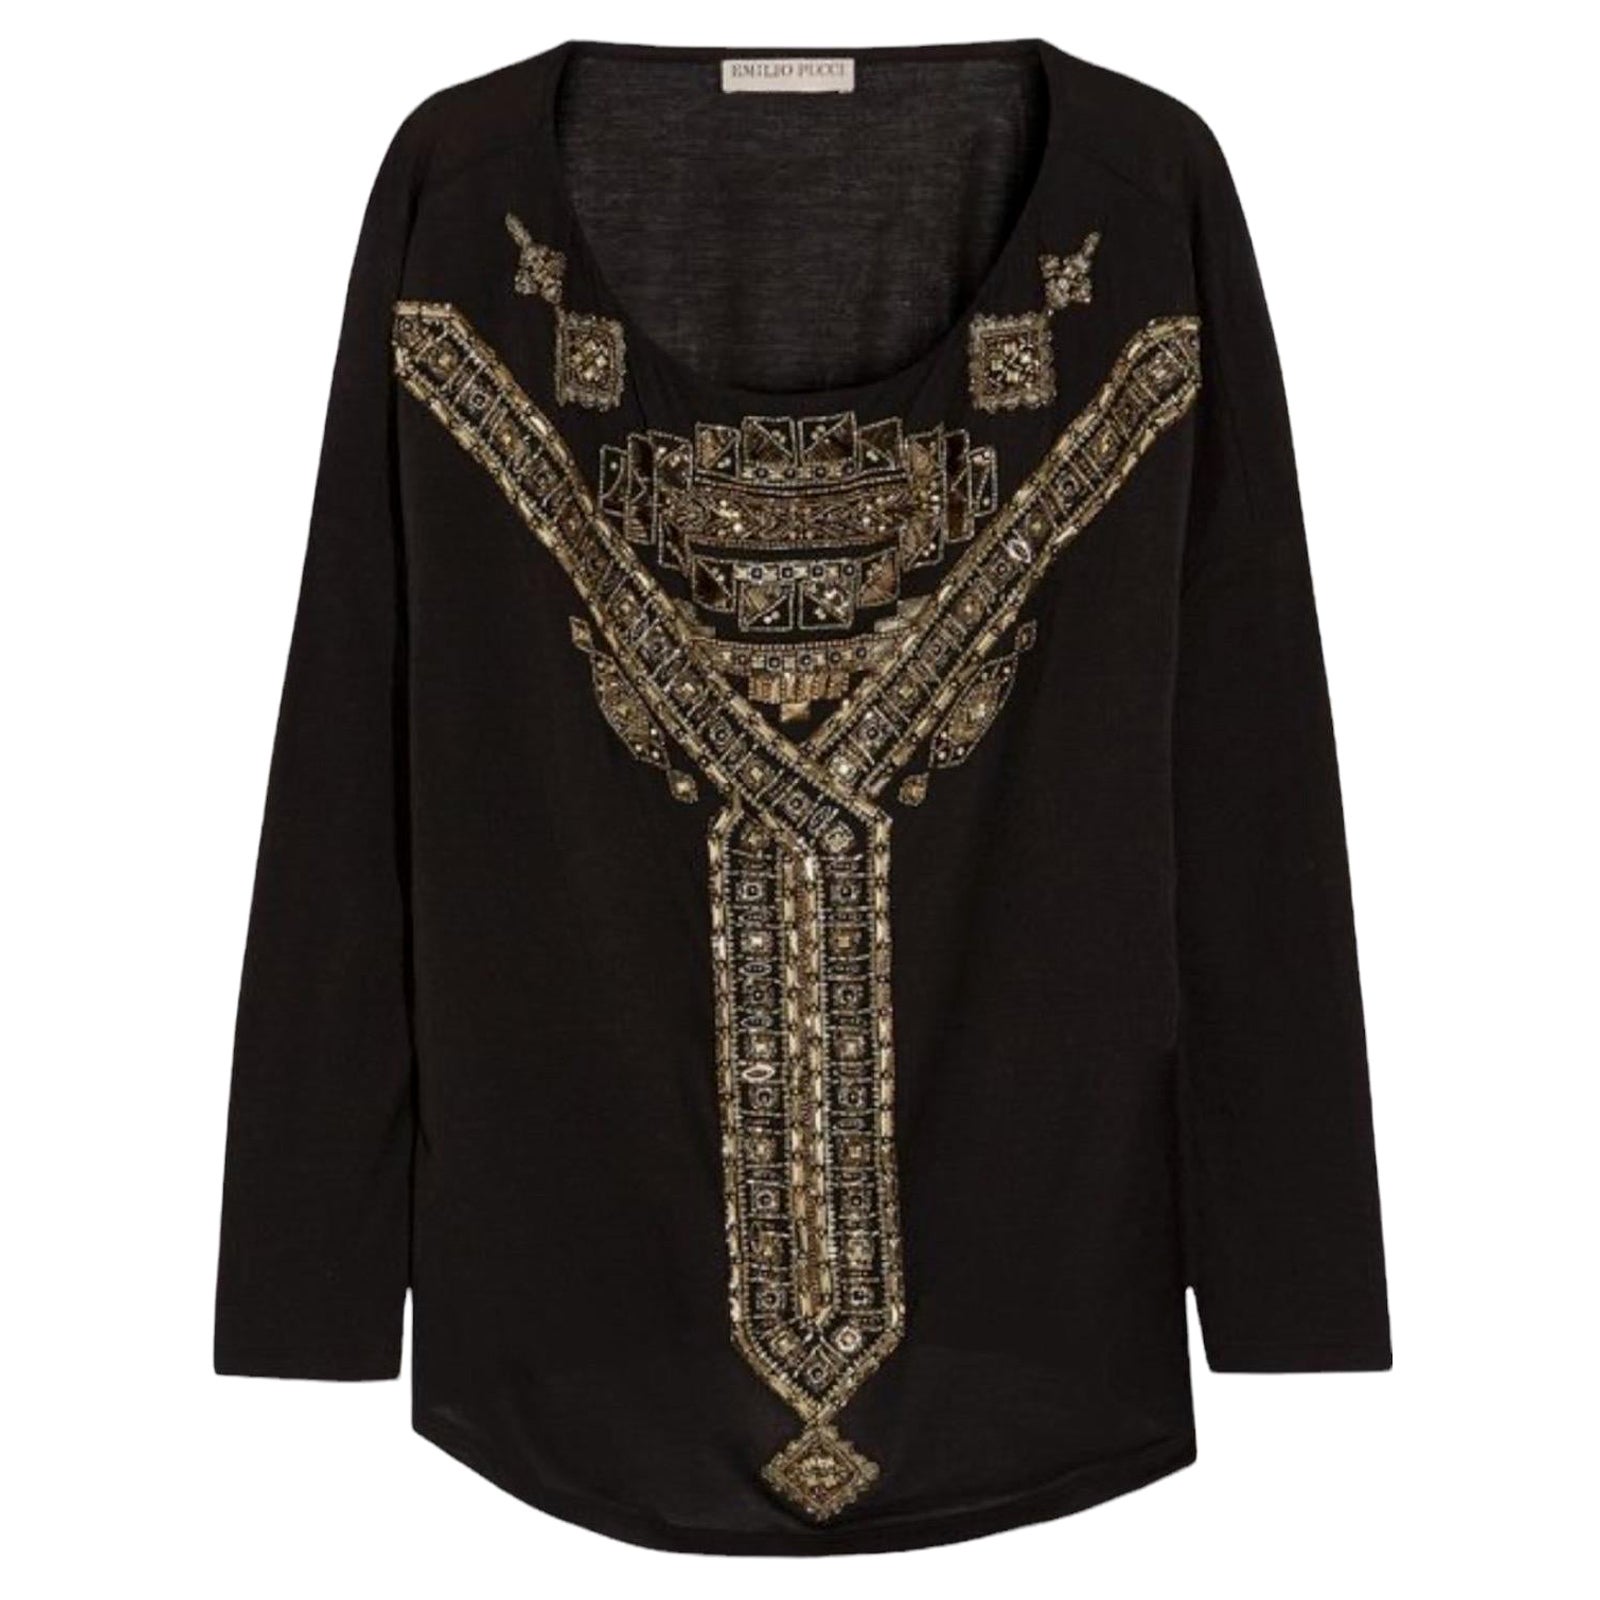 EMILIO PUCCI Black Embroidered Silk Blend Longsleeve Top Shirt 42 For Sale